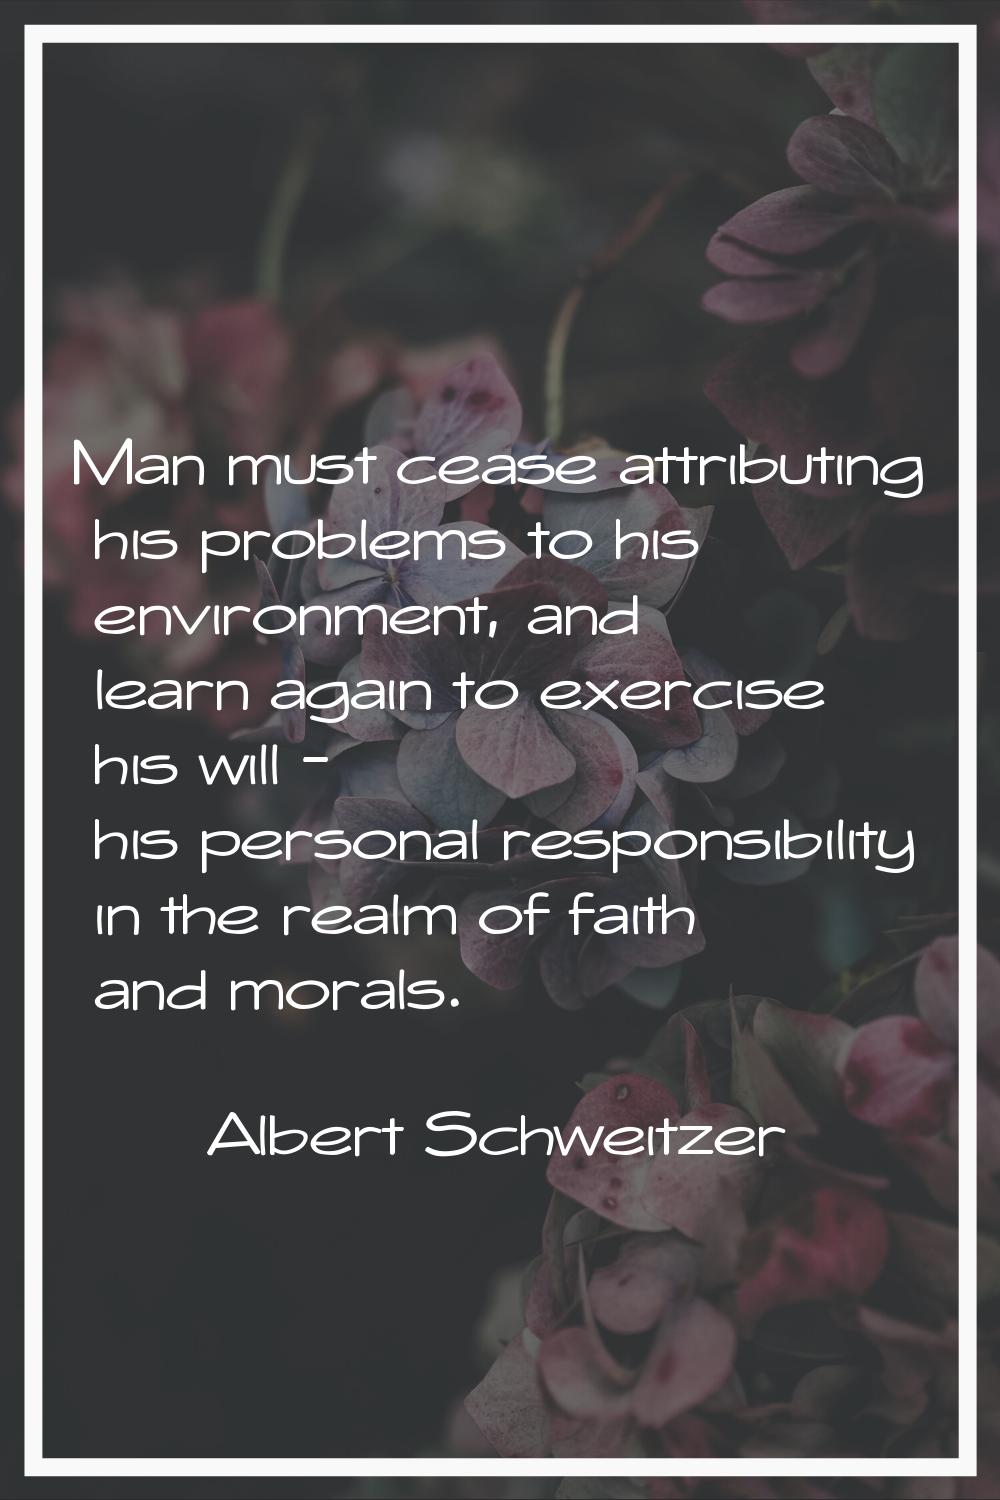 Man must cease attributing his problems to his environment, and learn again to exercise his will - 